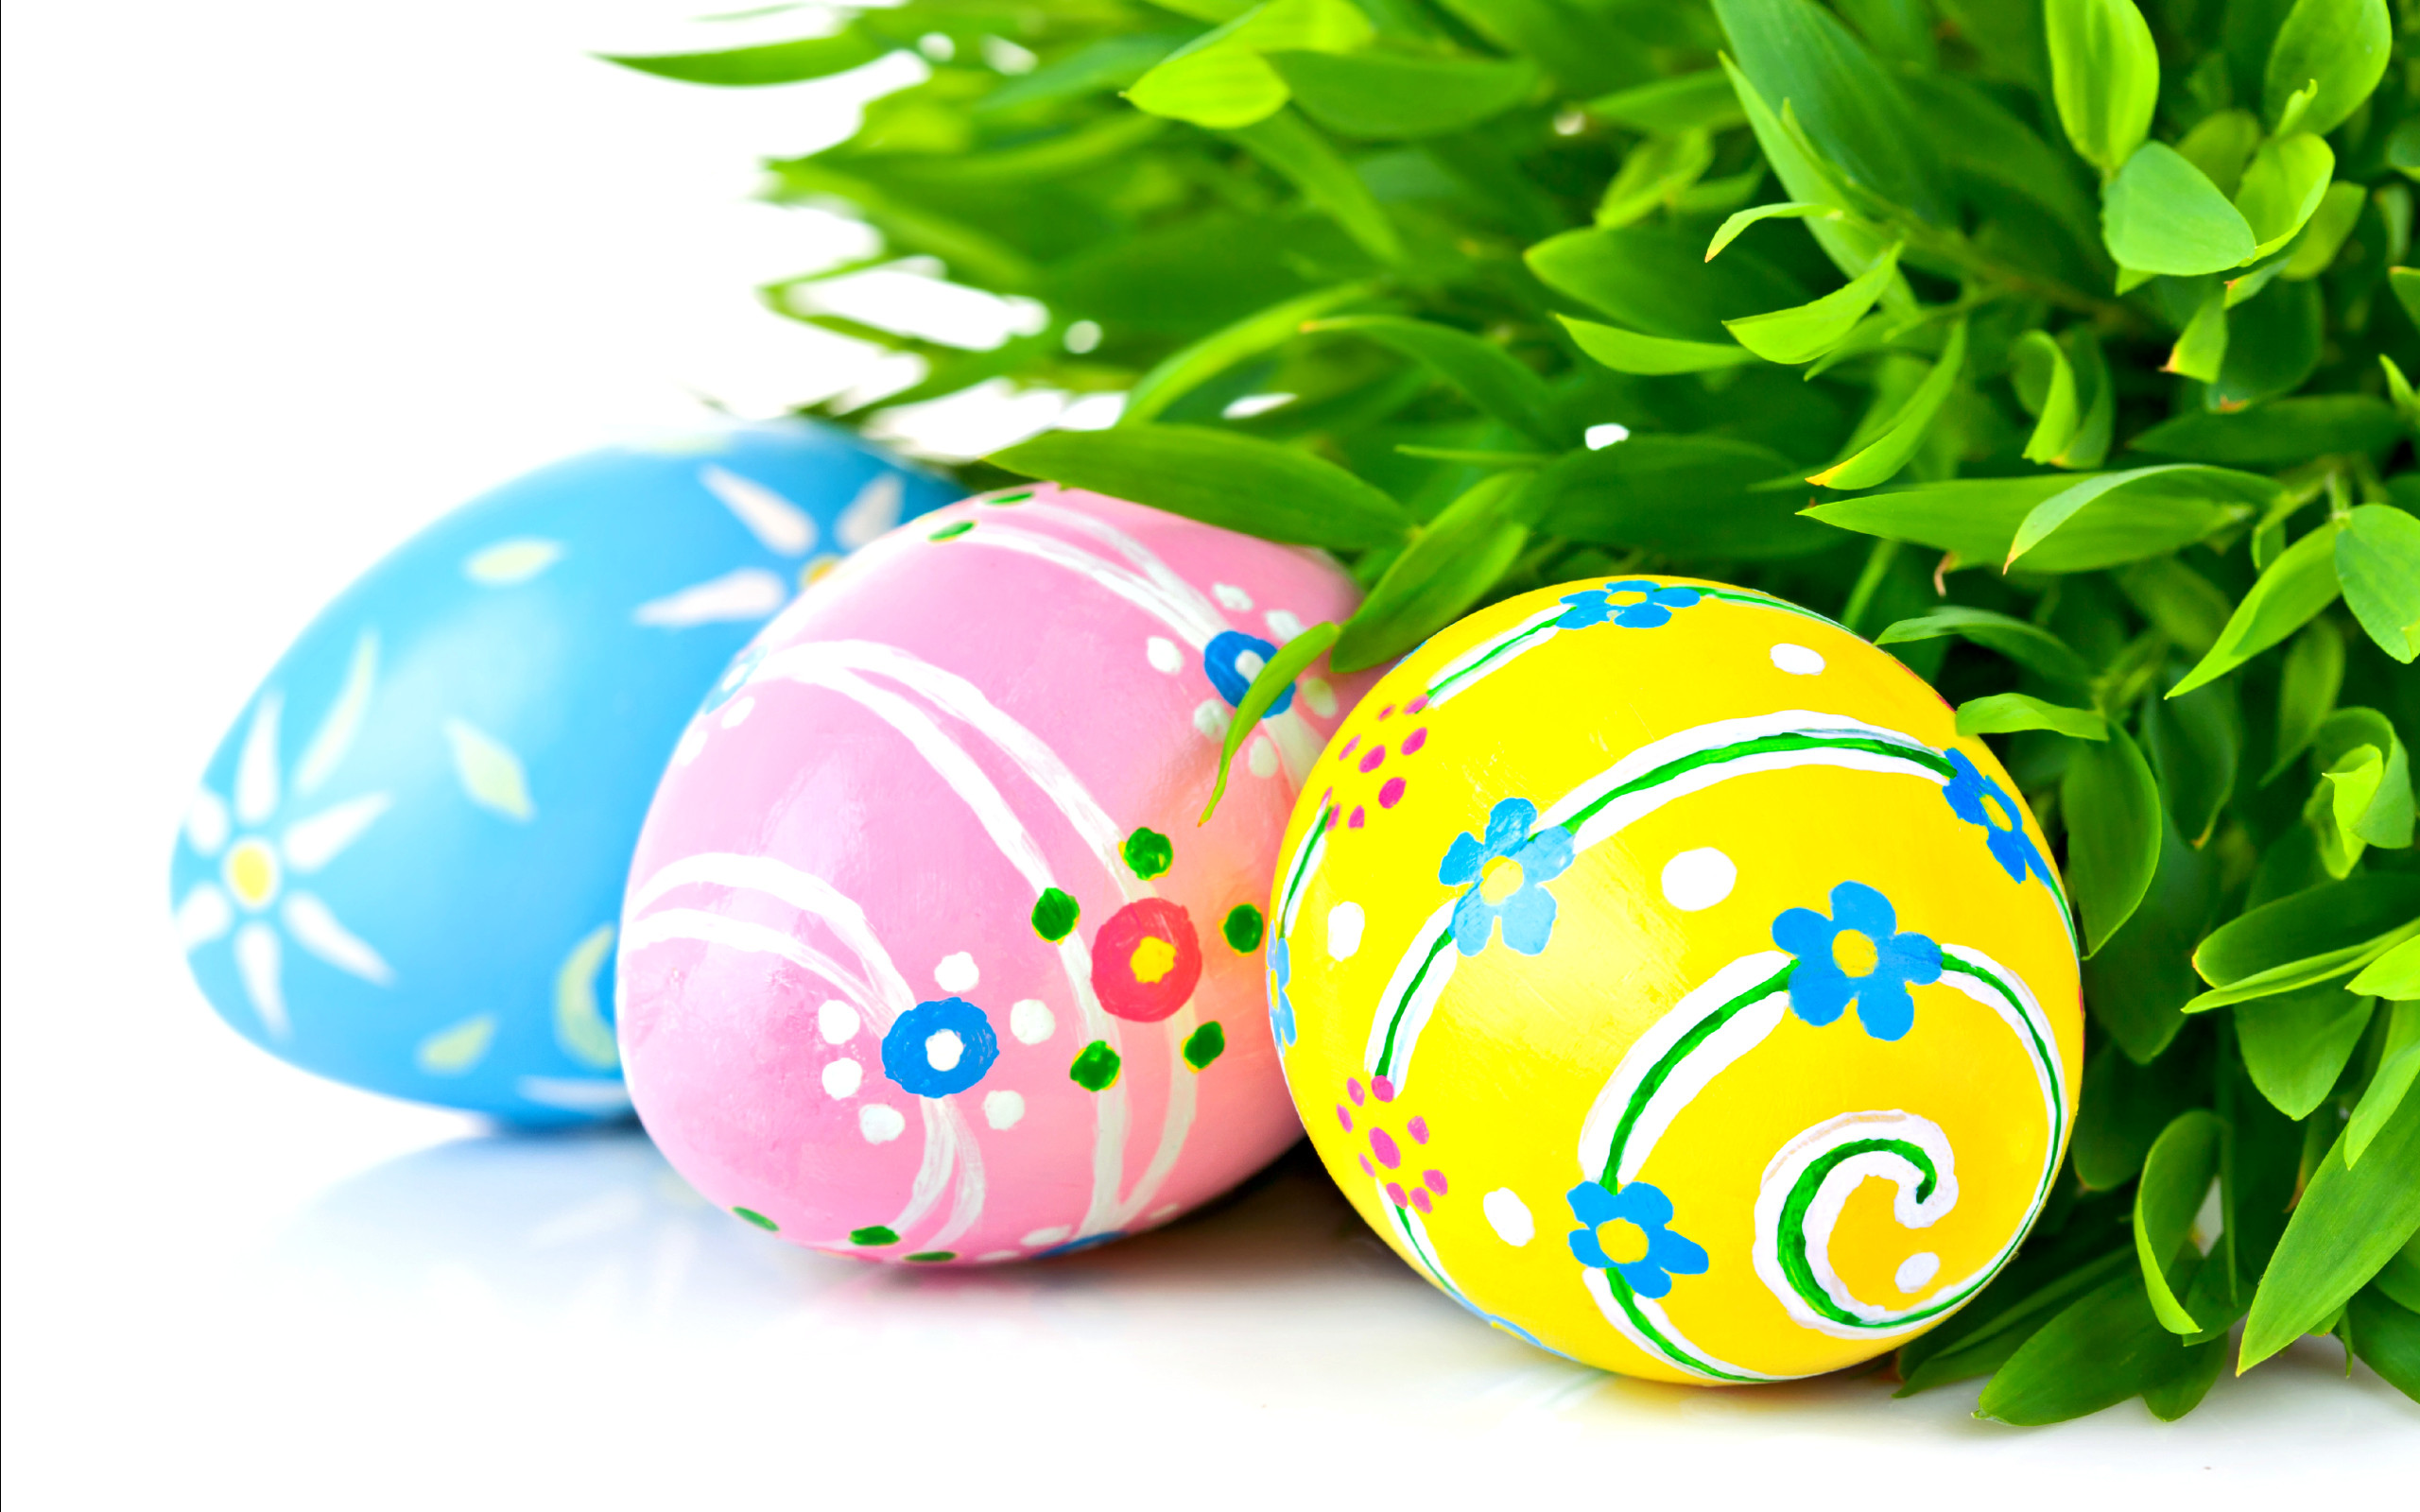 2560x1600 ... Easter Holiday Wallpaper | Easter Wallpaper ...